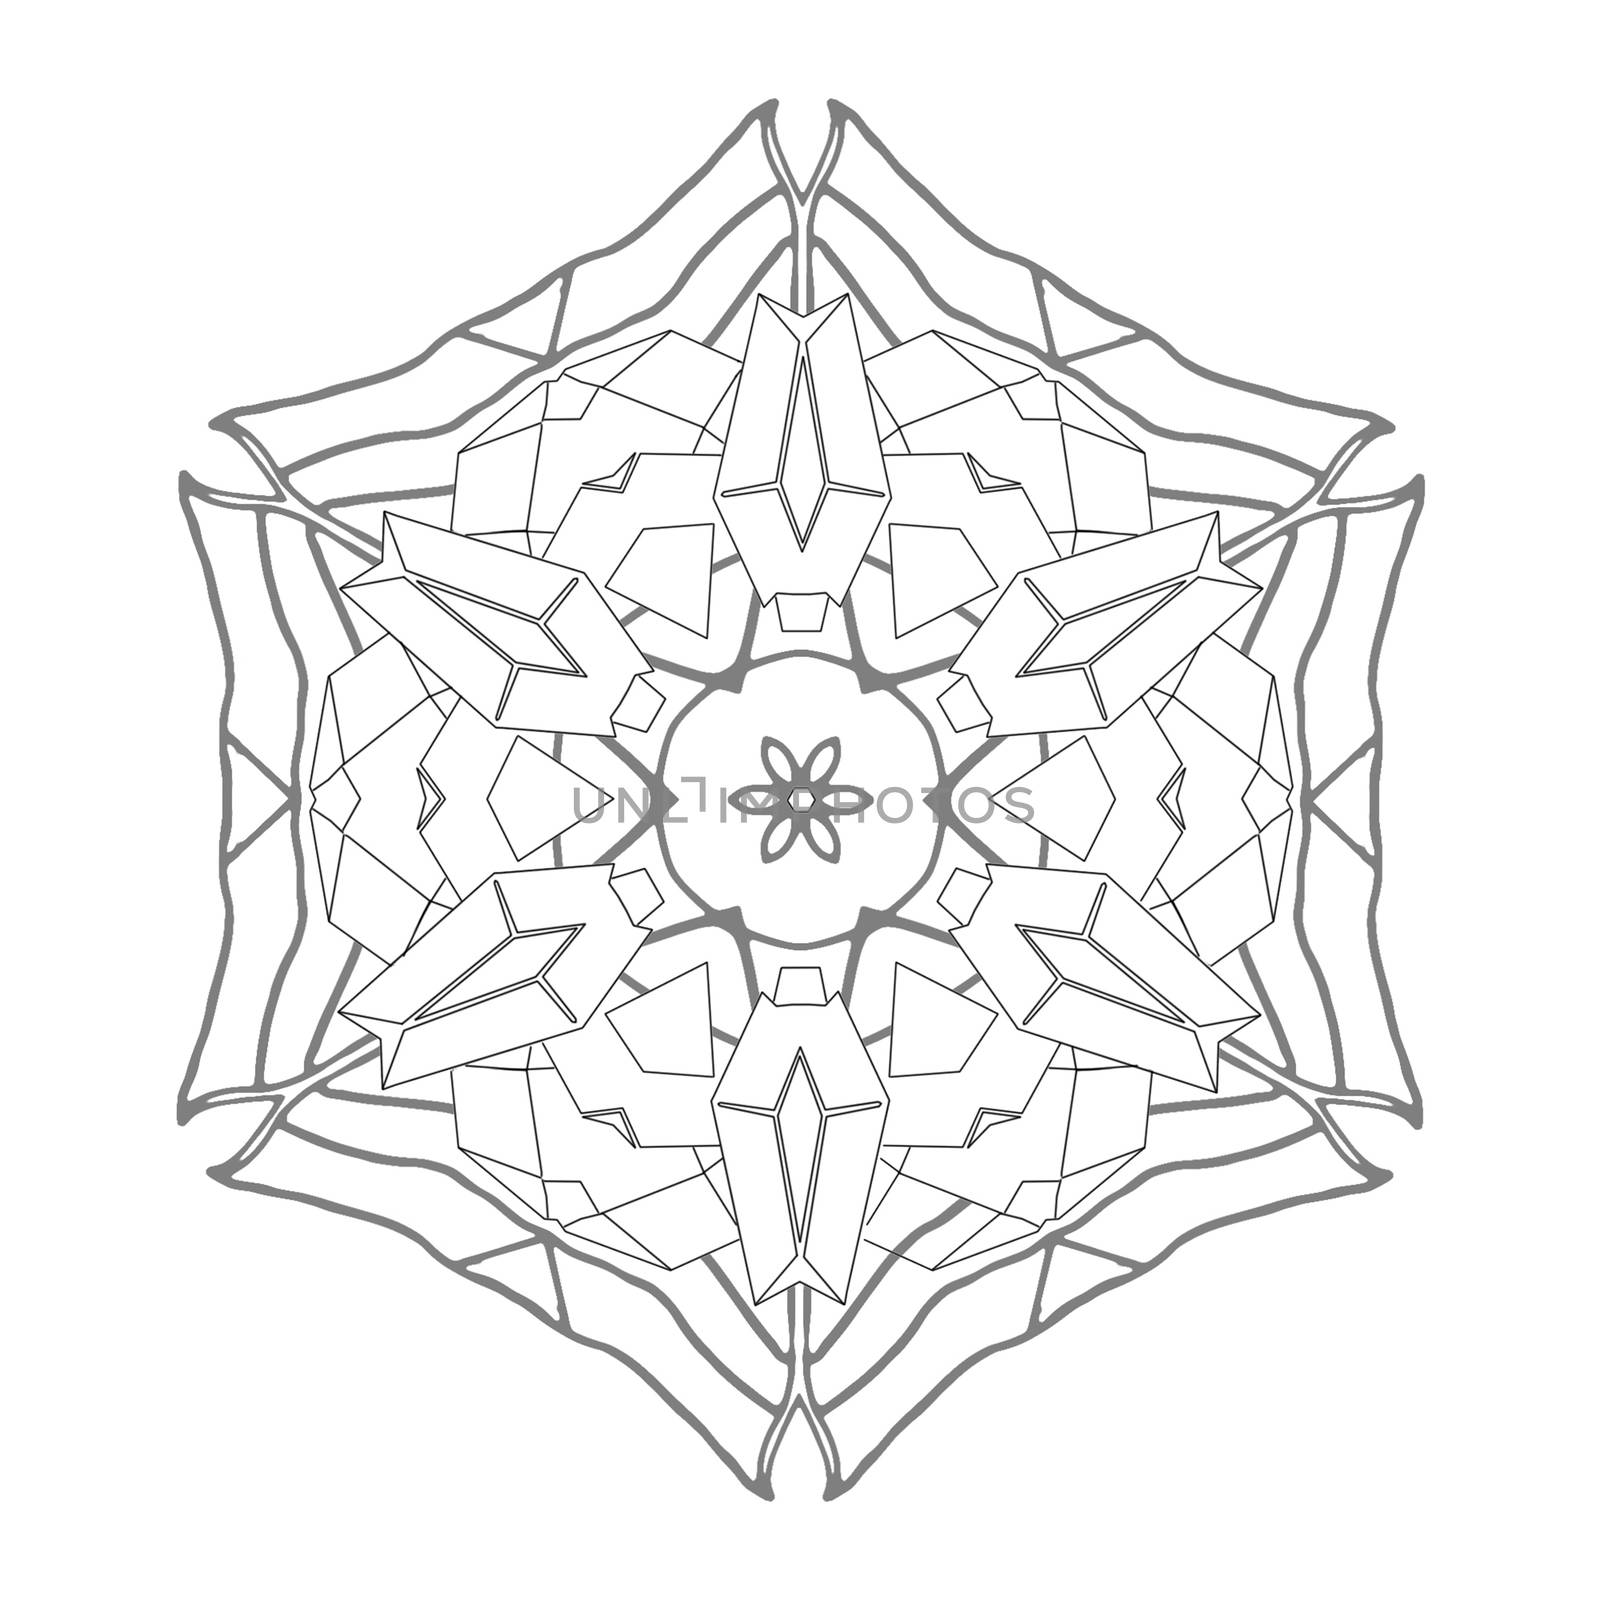 Illustration: Coloring Book Series: Magnificent Diamond Flower. Soft line. Print it and bring it to Life with Color! Fantastic Outline / Sketch / Line Art Design. by NextMars